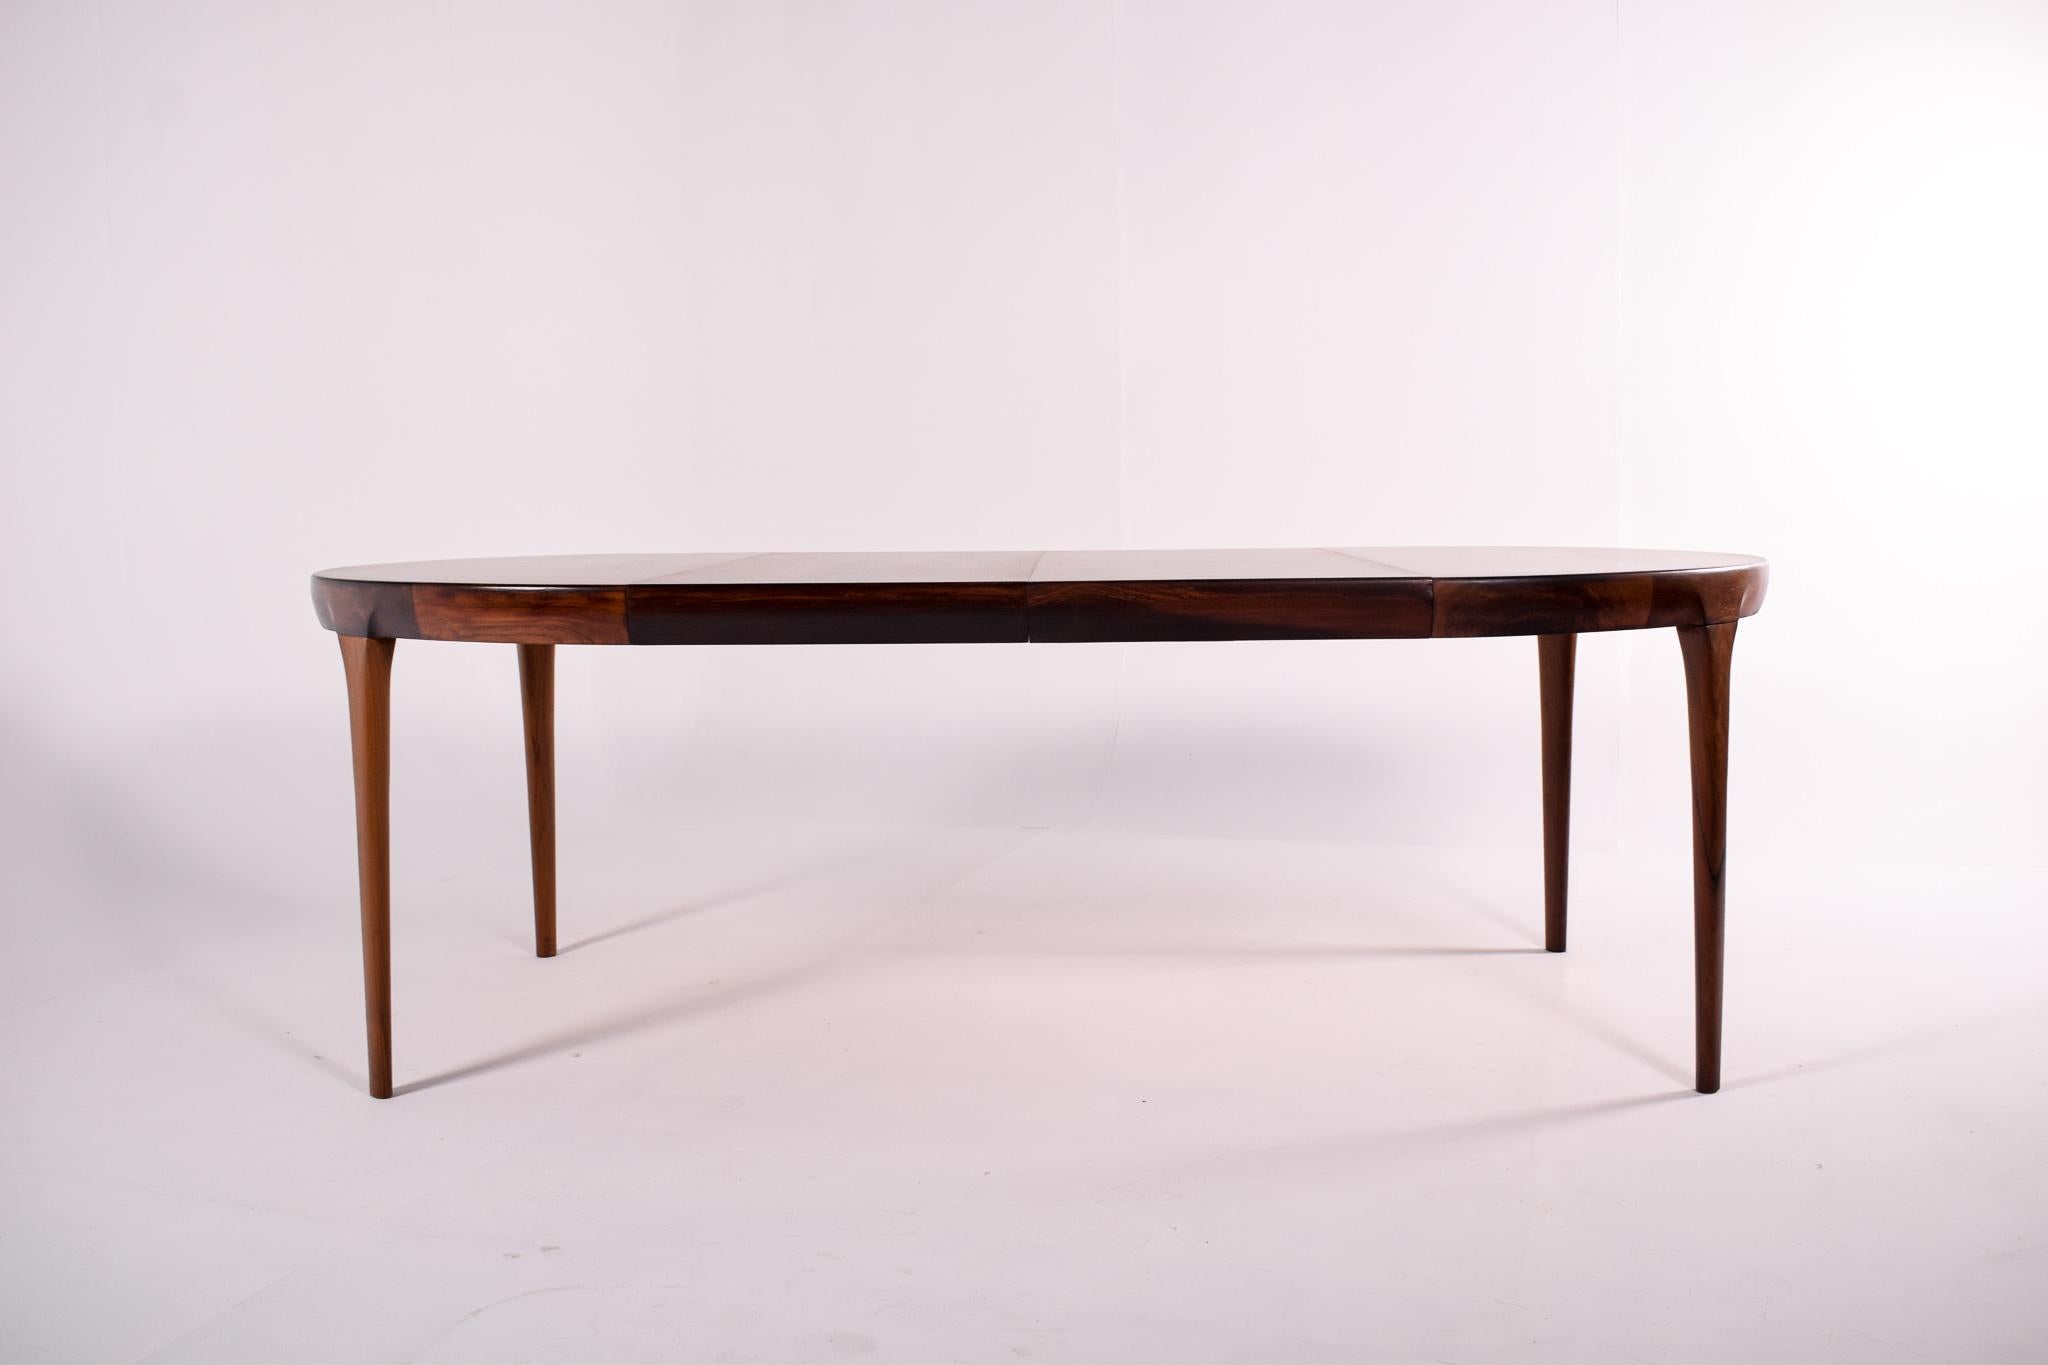 Extendable round dining table with a beautifull design, manufactured by Faarup Mobelfabrik in Denmark, circa 1960. This fantastic table is made of high quality rosewood and has two extension leaves, with 50 cm each. It is a beautiful Danish piece